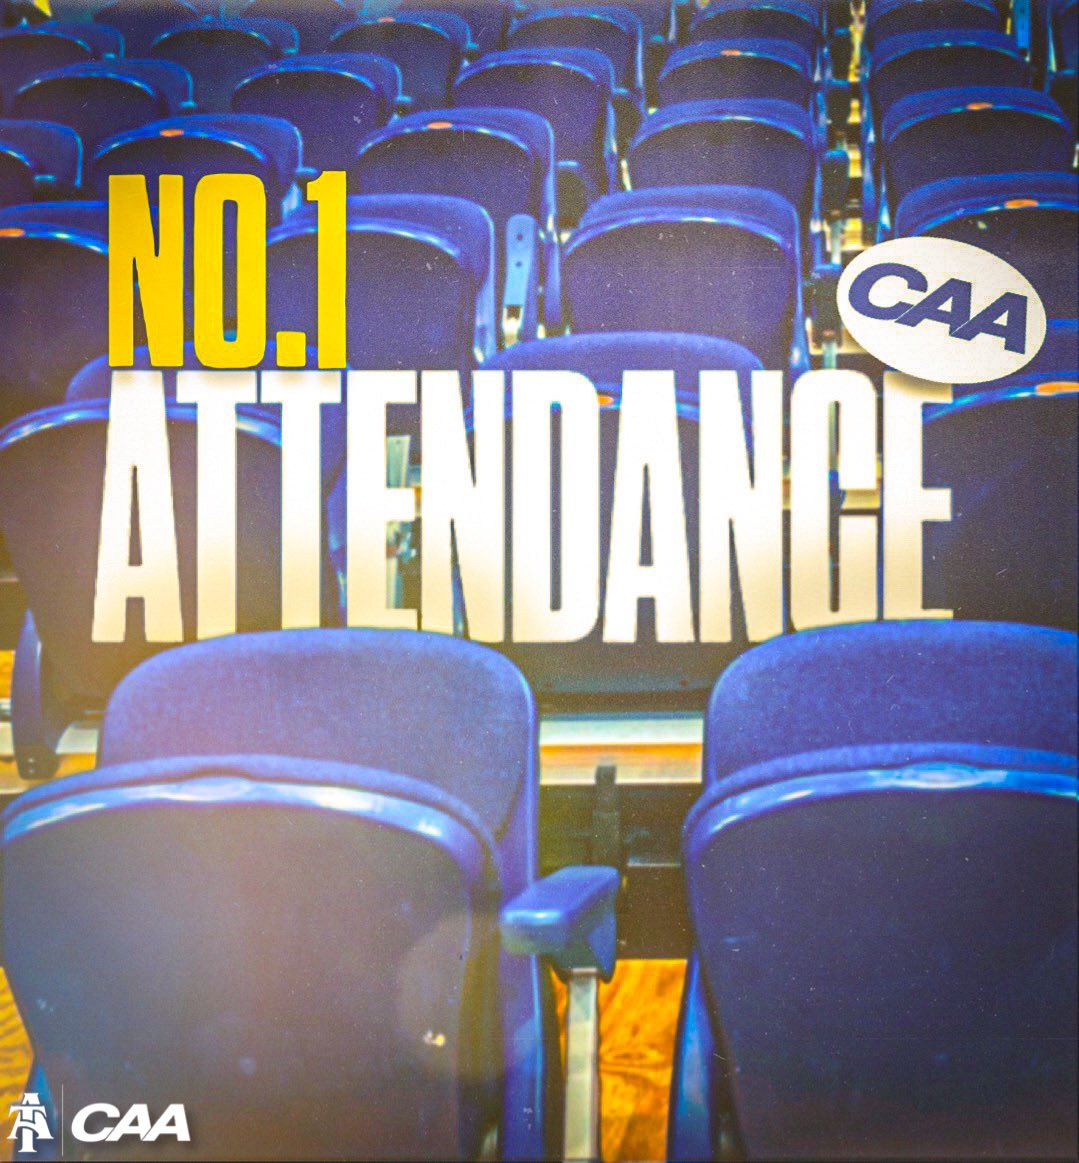 𝐀𝐠𝐠𝐢𝐞𝐬 𝐃𝐨 😉👏⁣⁣ ⁣⁣⁣⁣⁣ Finished the season with the highest attendance avg. in the @caasports! Thank you to all of the Aggie faithful for your support this year!⁣⁣ ⁣⁣⁣⁣⁣⁣⁣ #AggieWBB💙💛 #Commit2Grit #WeAboveMe #LevelUp #BeUncommon⁣